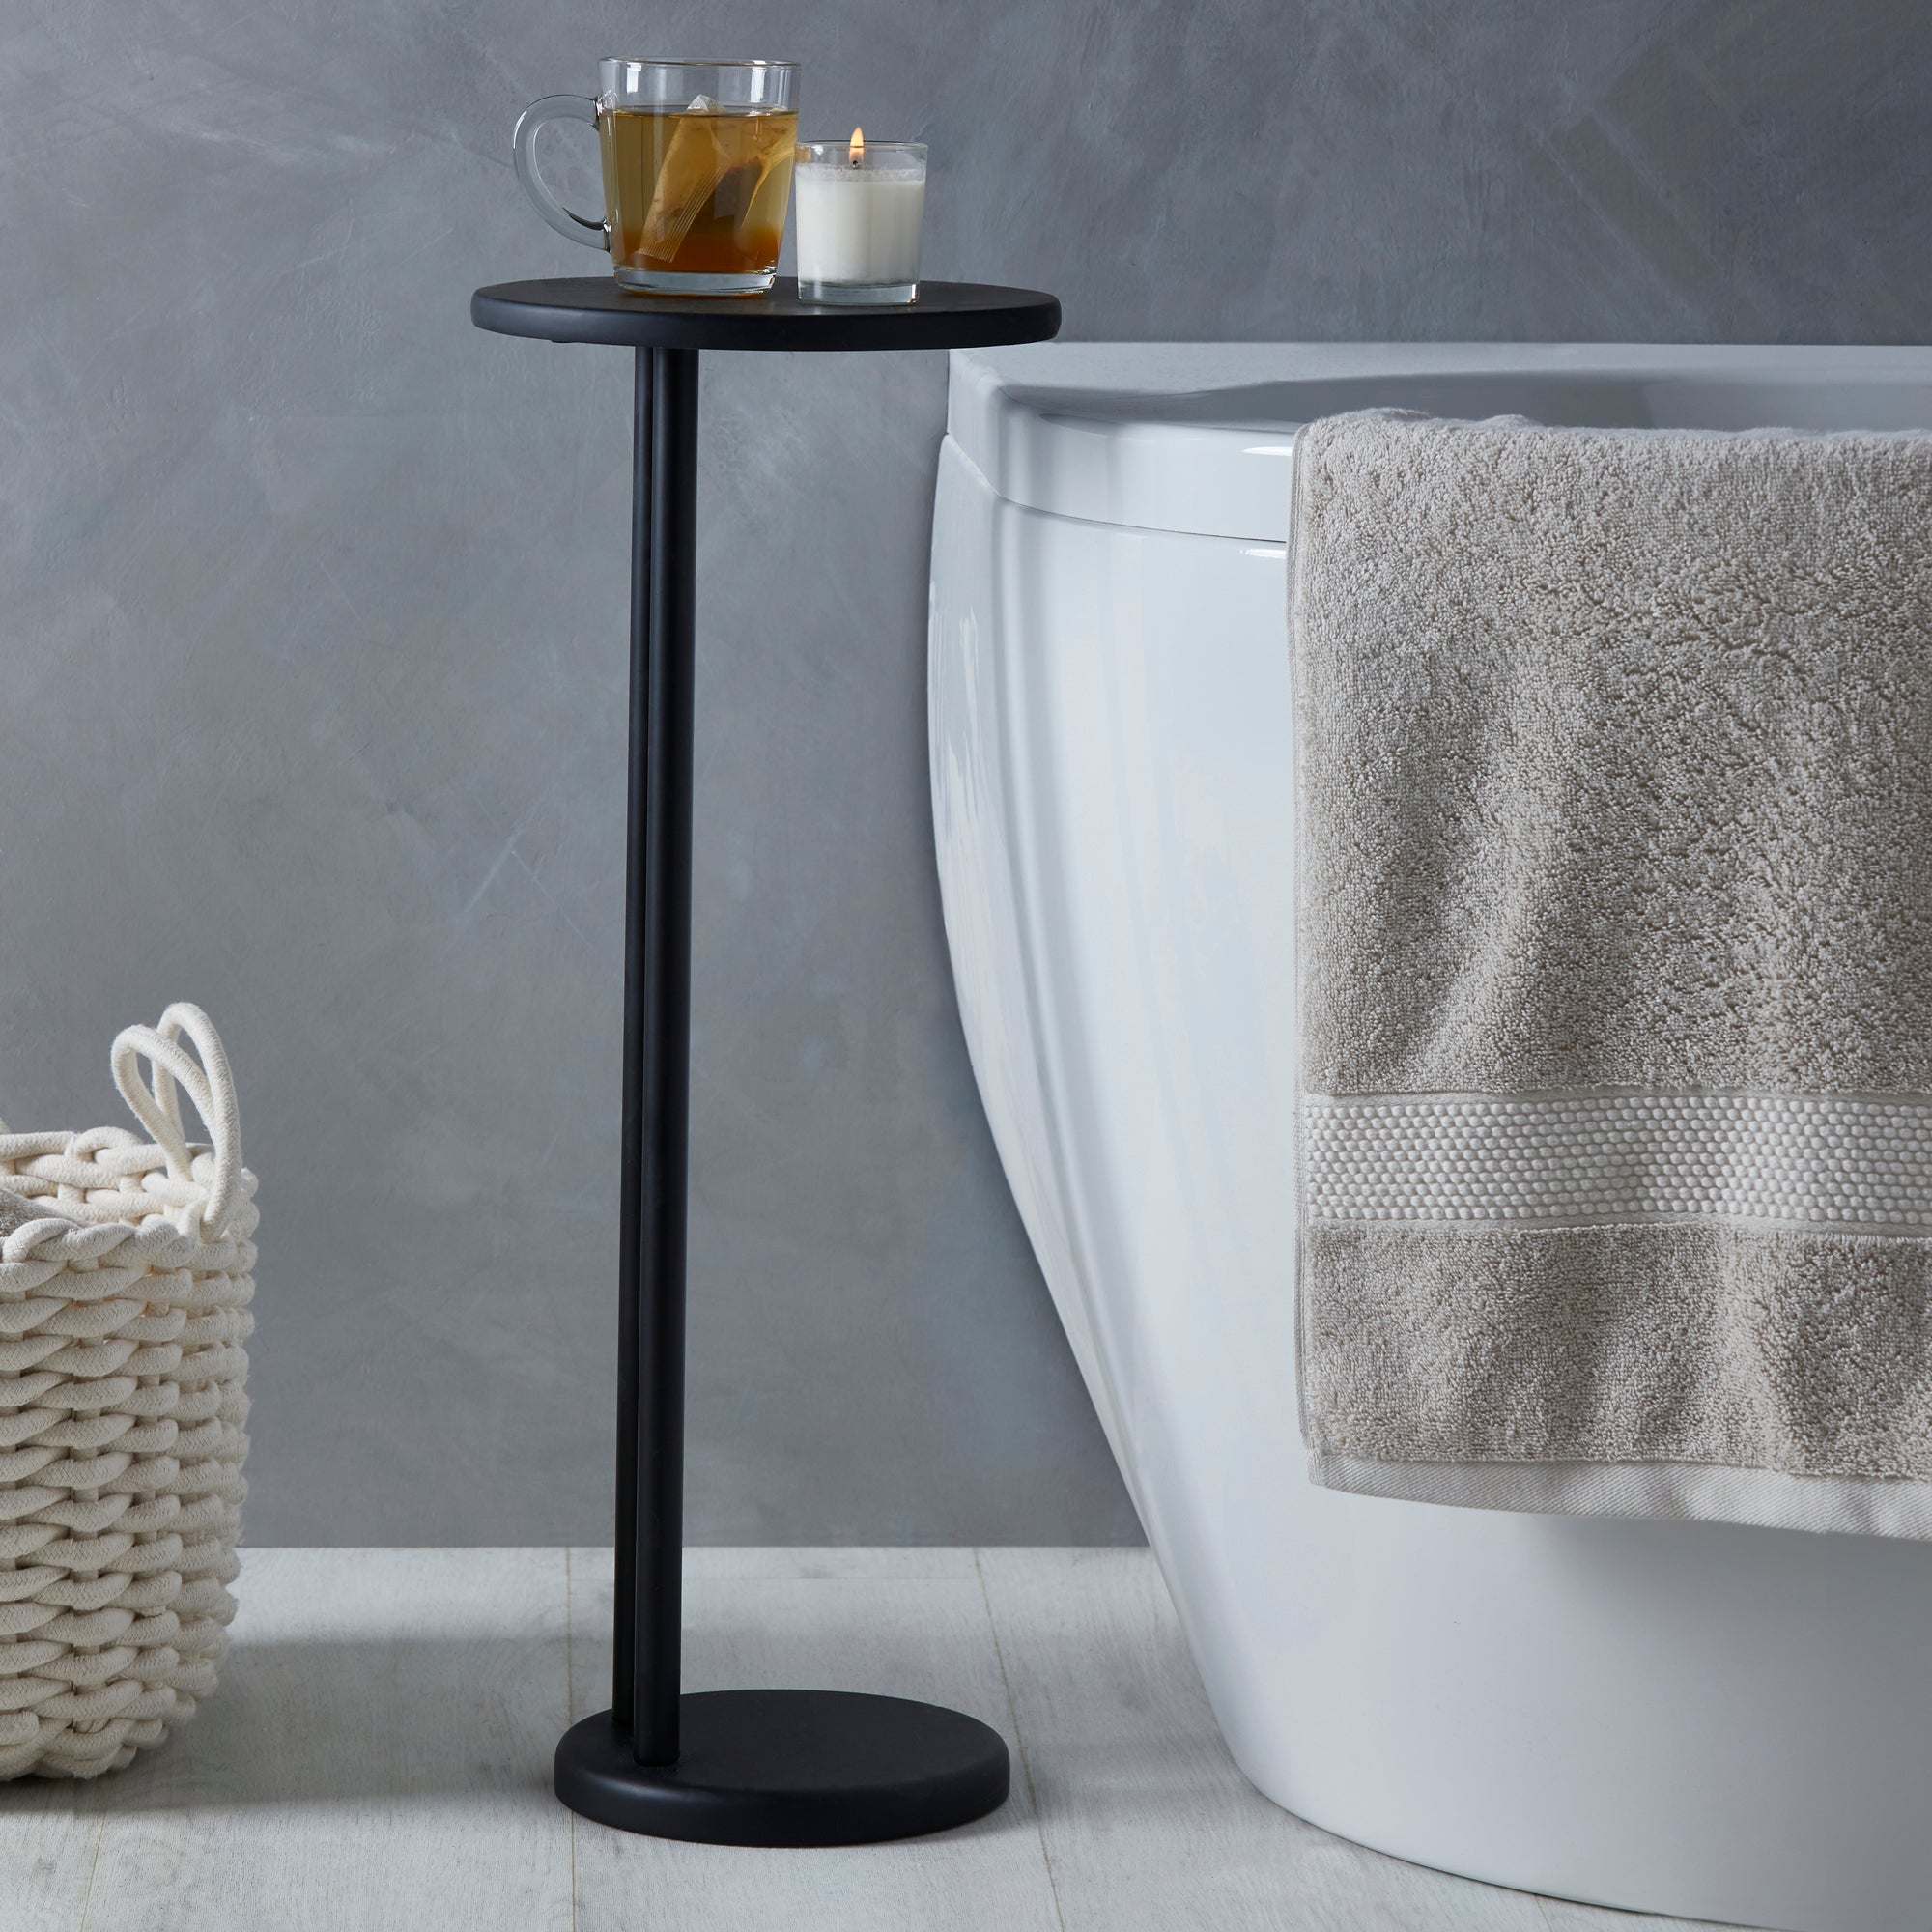 The Dunelm bath side table is the new must-have bathroom accessory